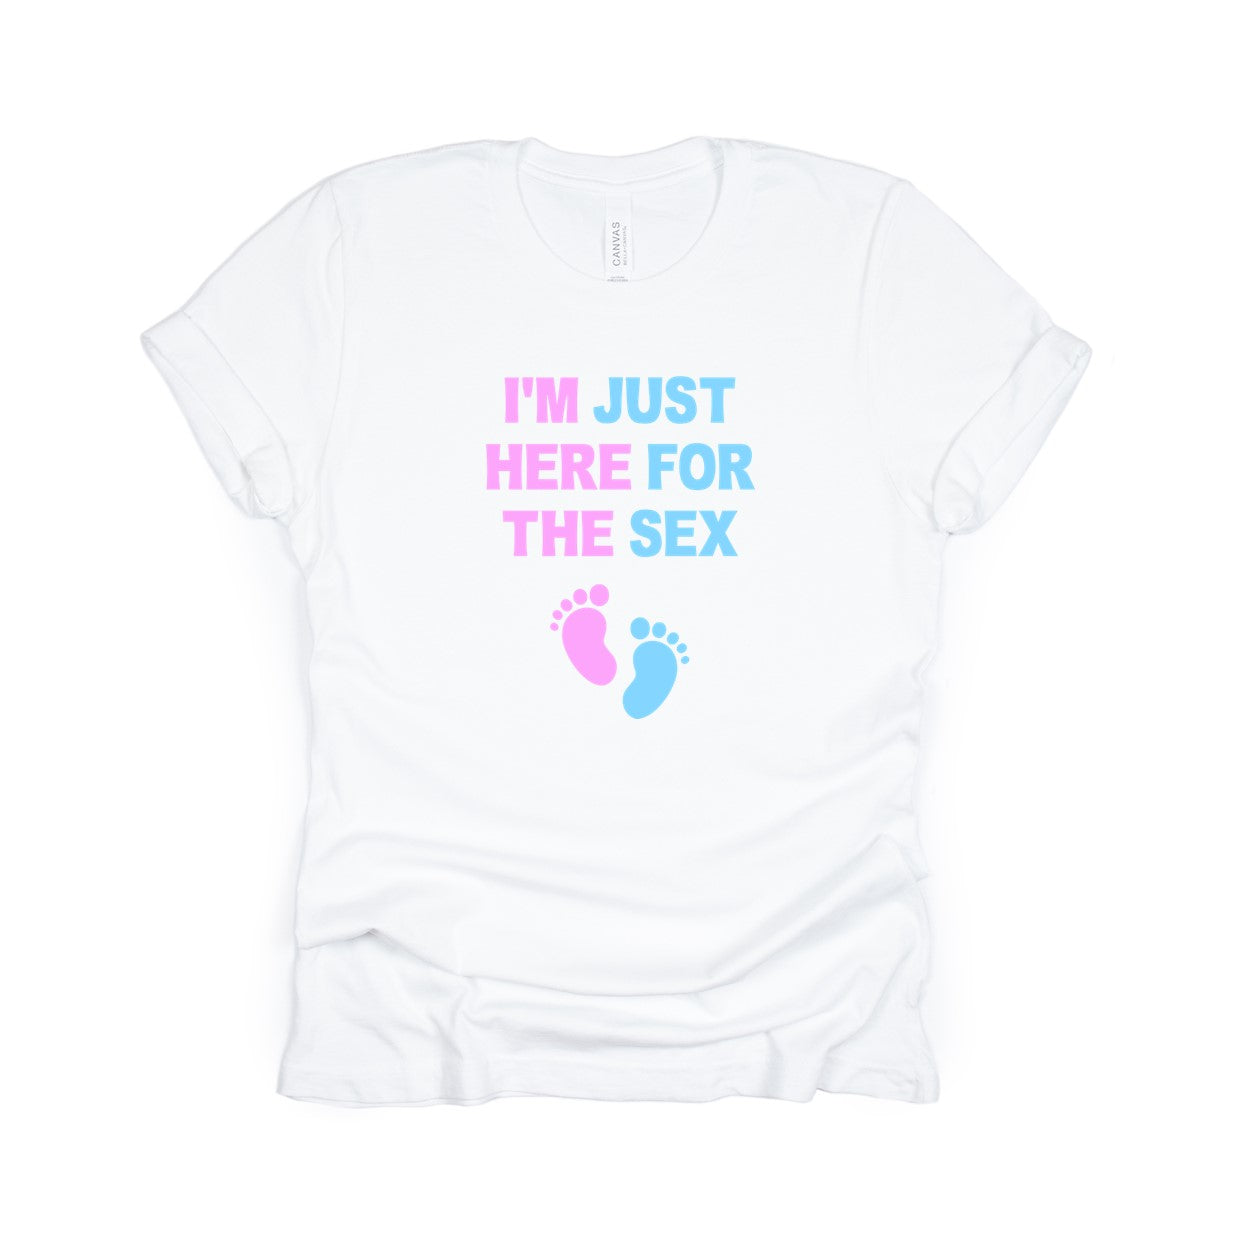 I'm just here for the sex - Fun Gender Reveal T-Shirt - Pink and Blue Baby Feet